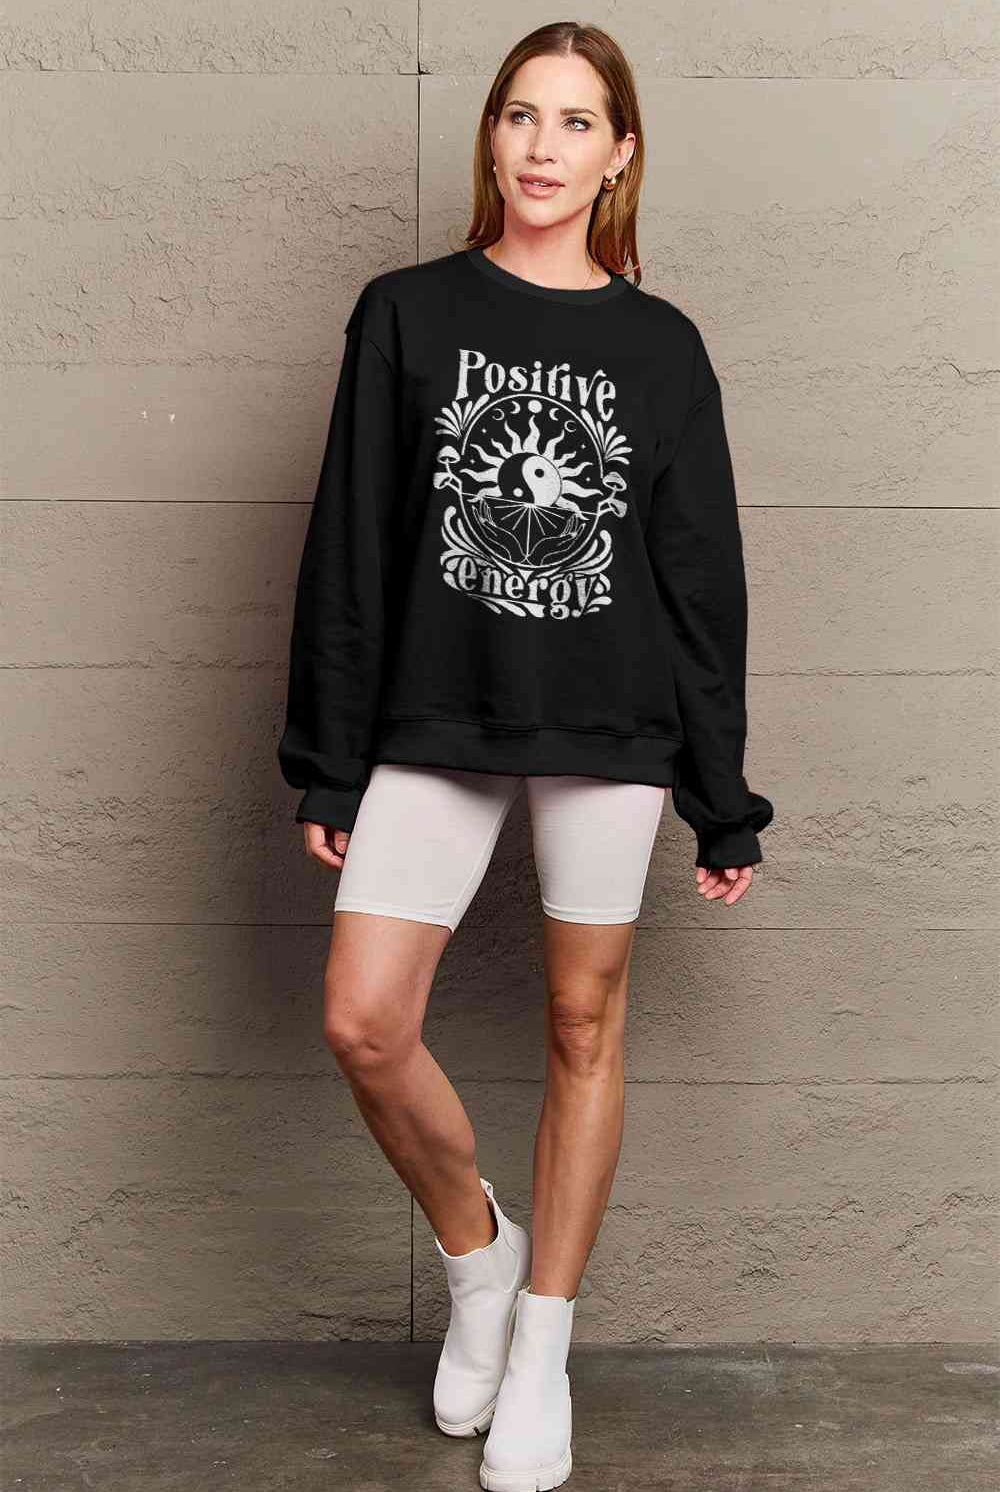 Simply Love Full Size POSITIVE ENERGY Graphic Sweatshirt - GemThreads Boutique